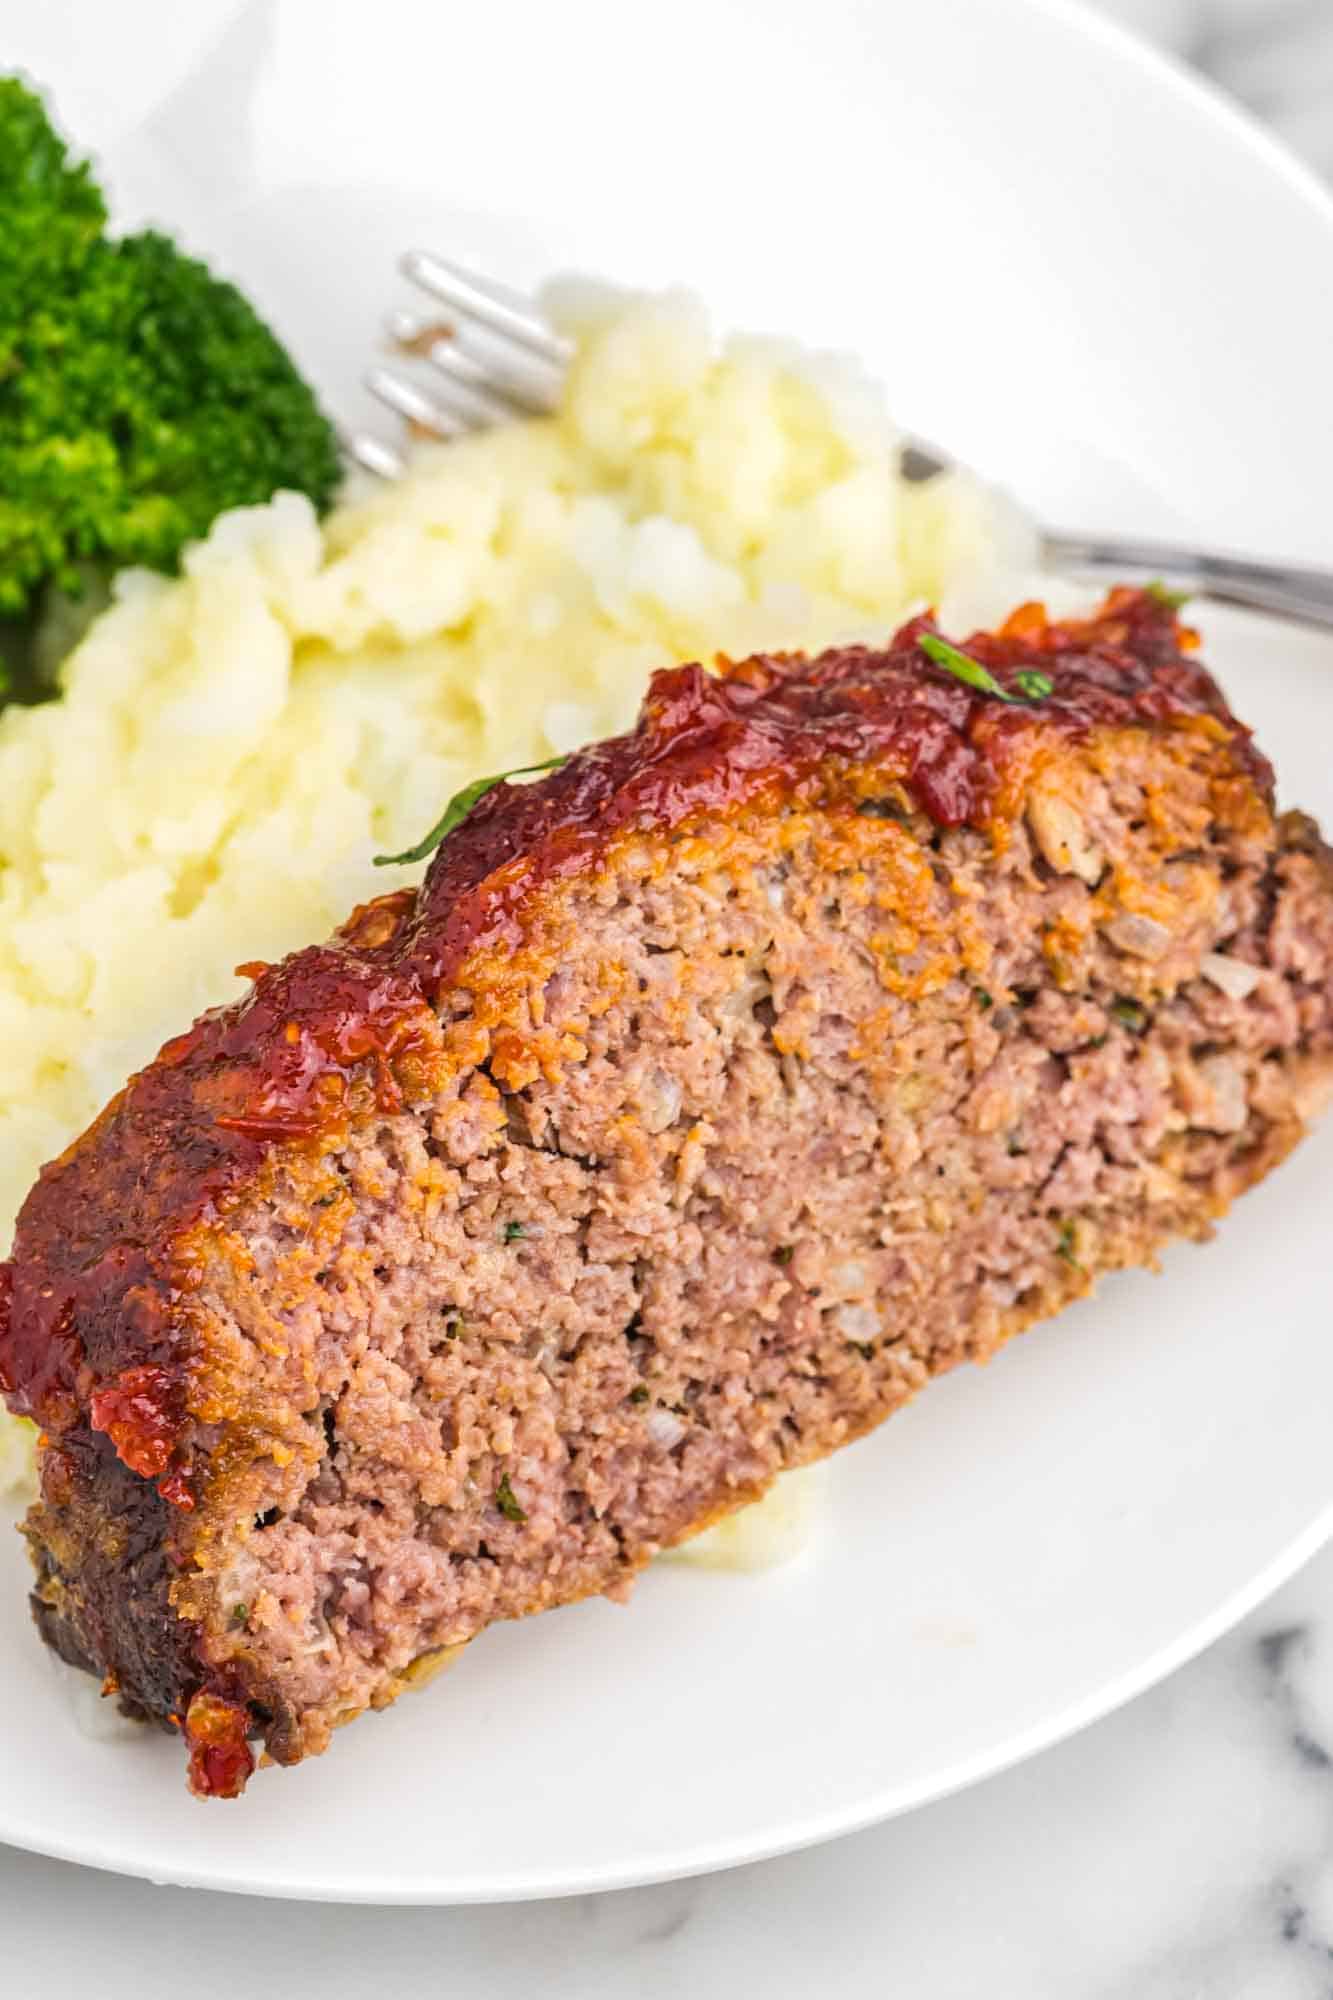 A slice of meatload served with mashed potatoes and steamed broccoli